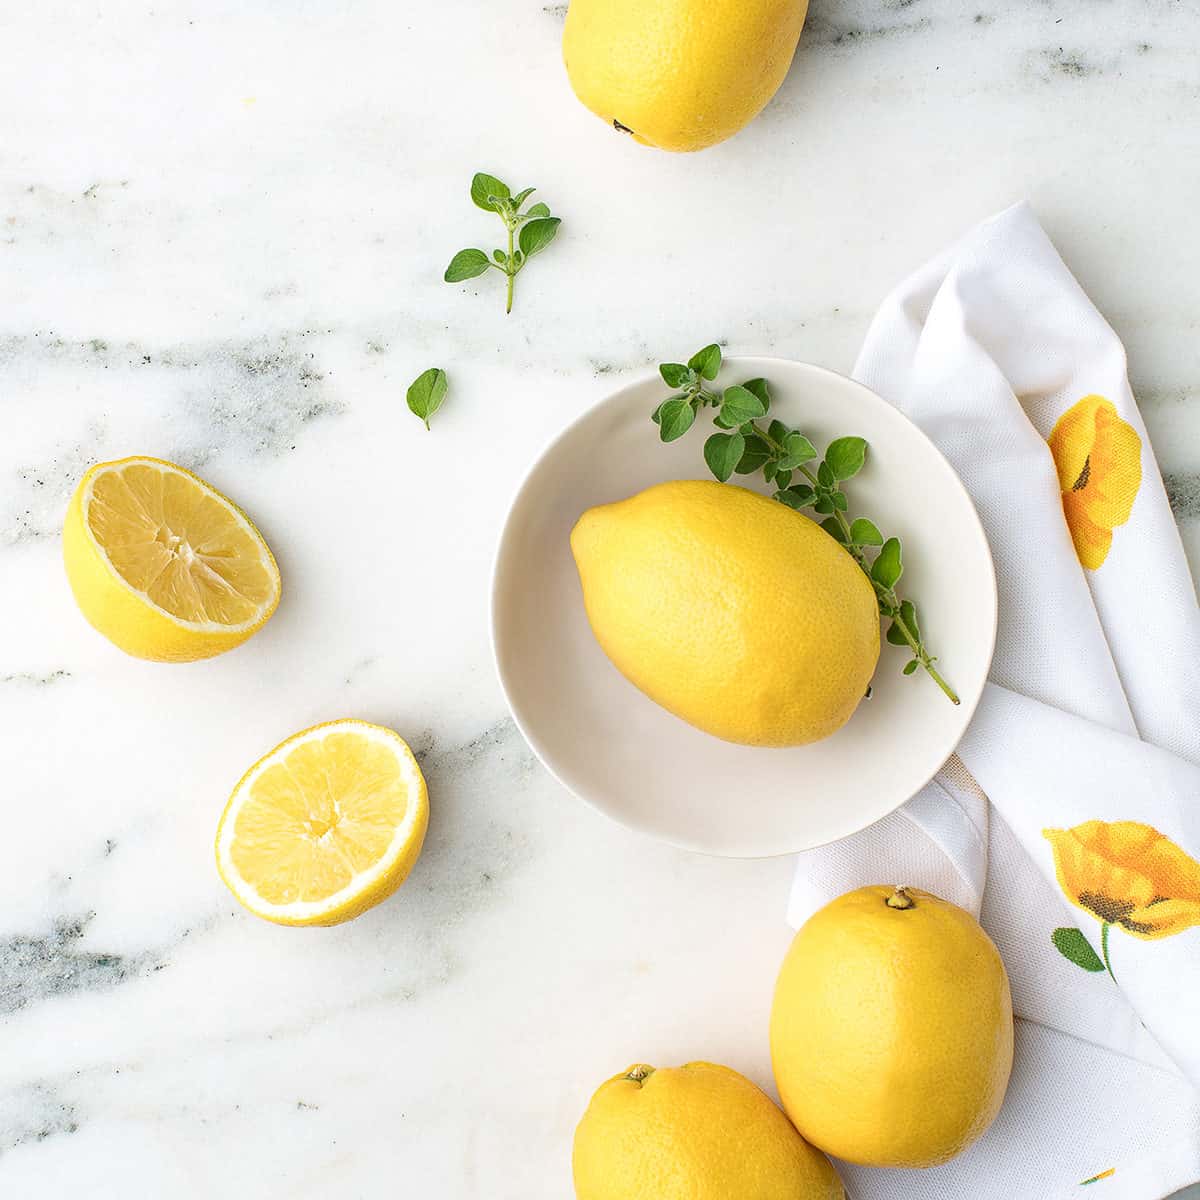 whole lemons and slices of lemon on a countertop with a small white bowl and tea towel.